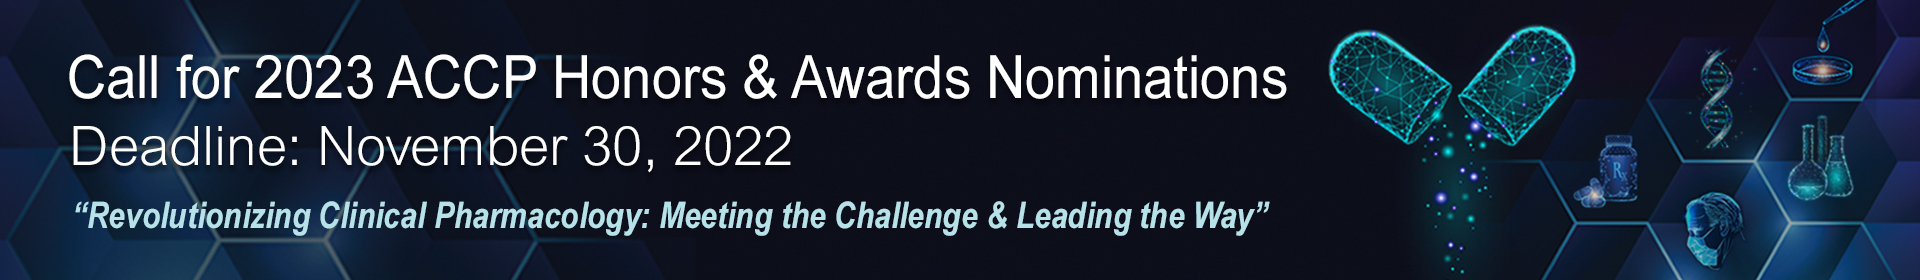 Call for 2022 ACCP Honors & Awards Nominations Banner